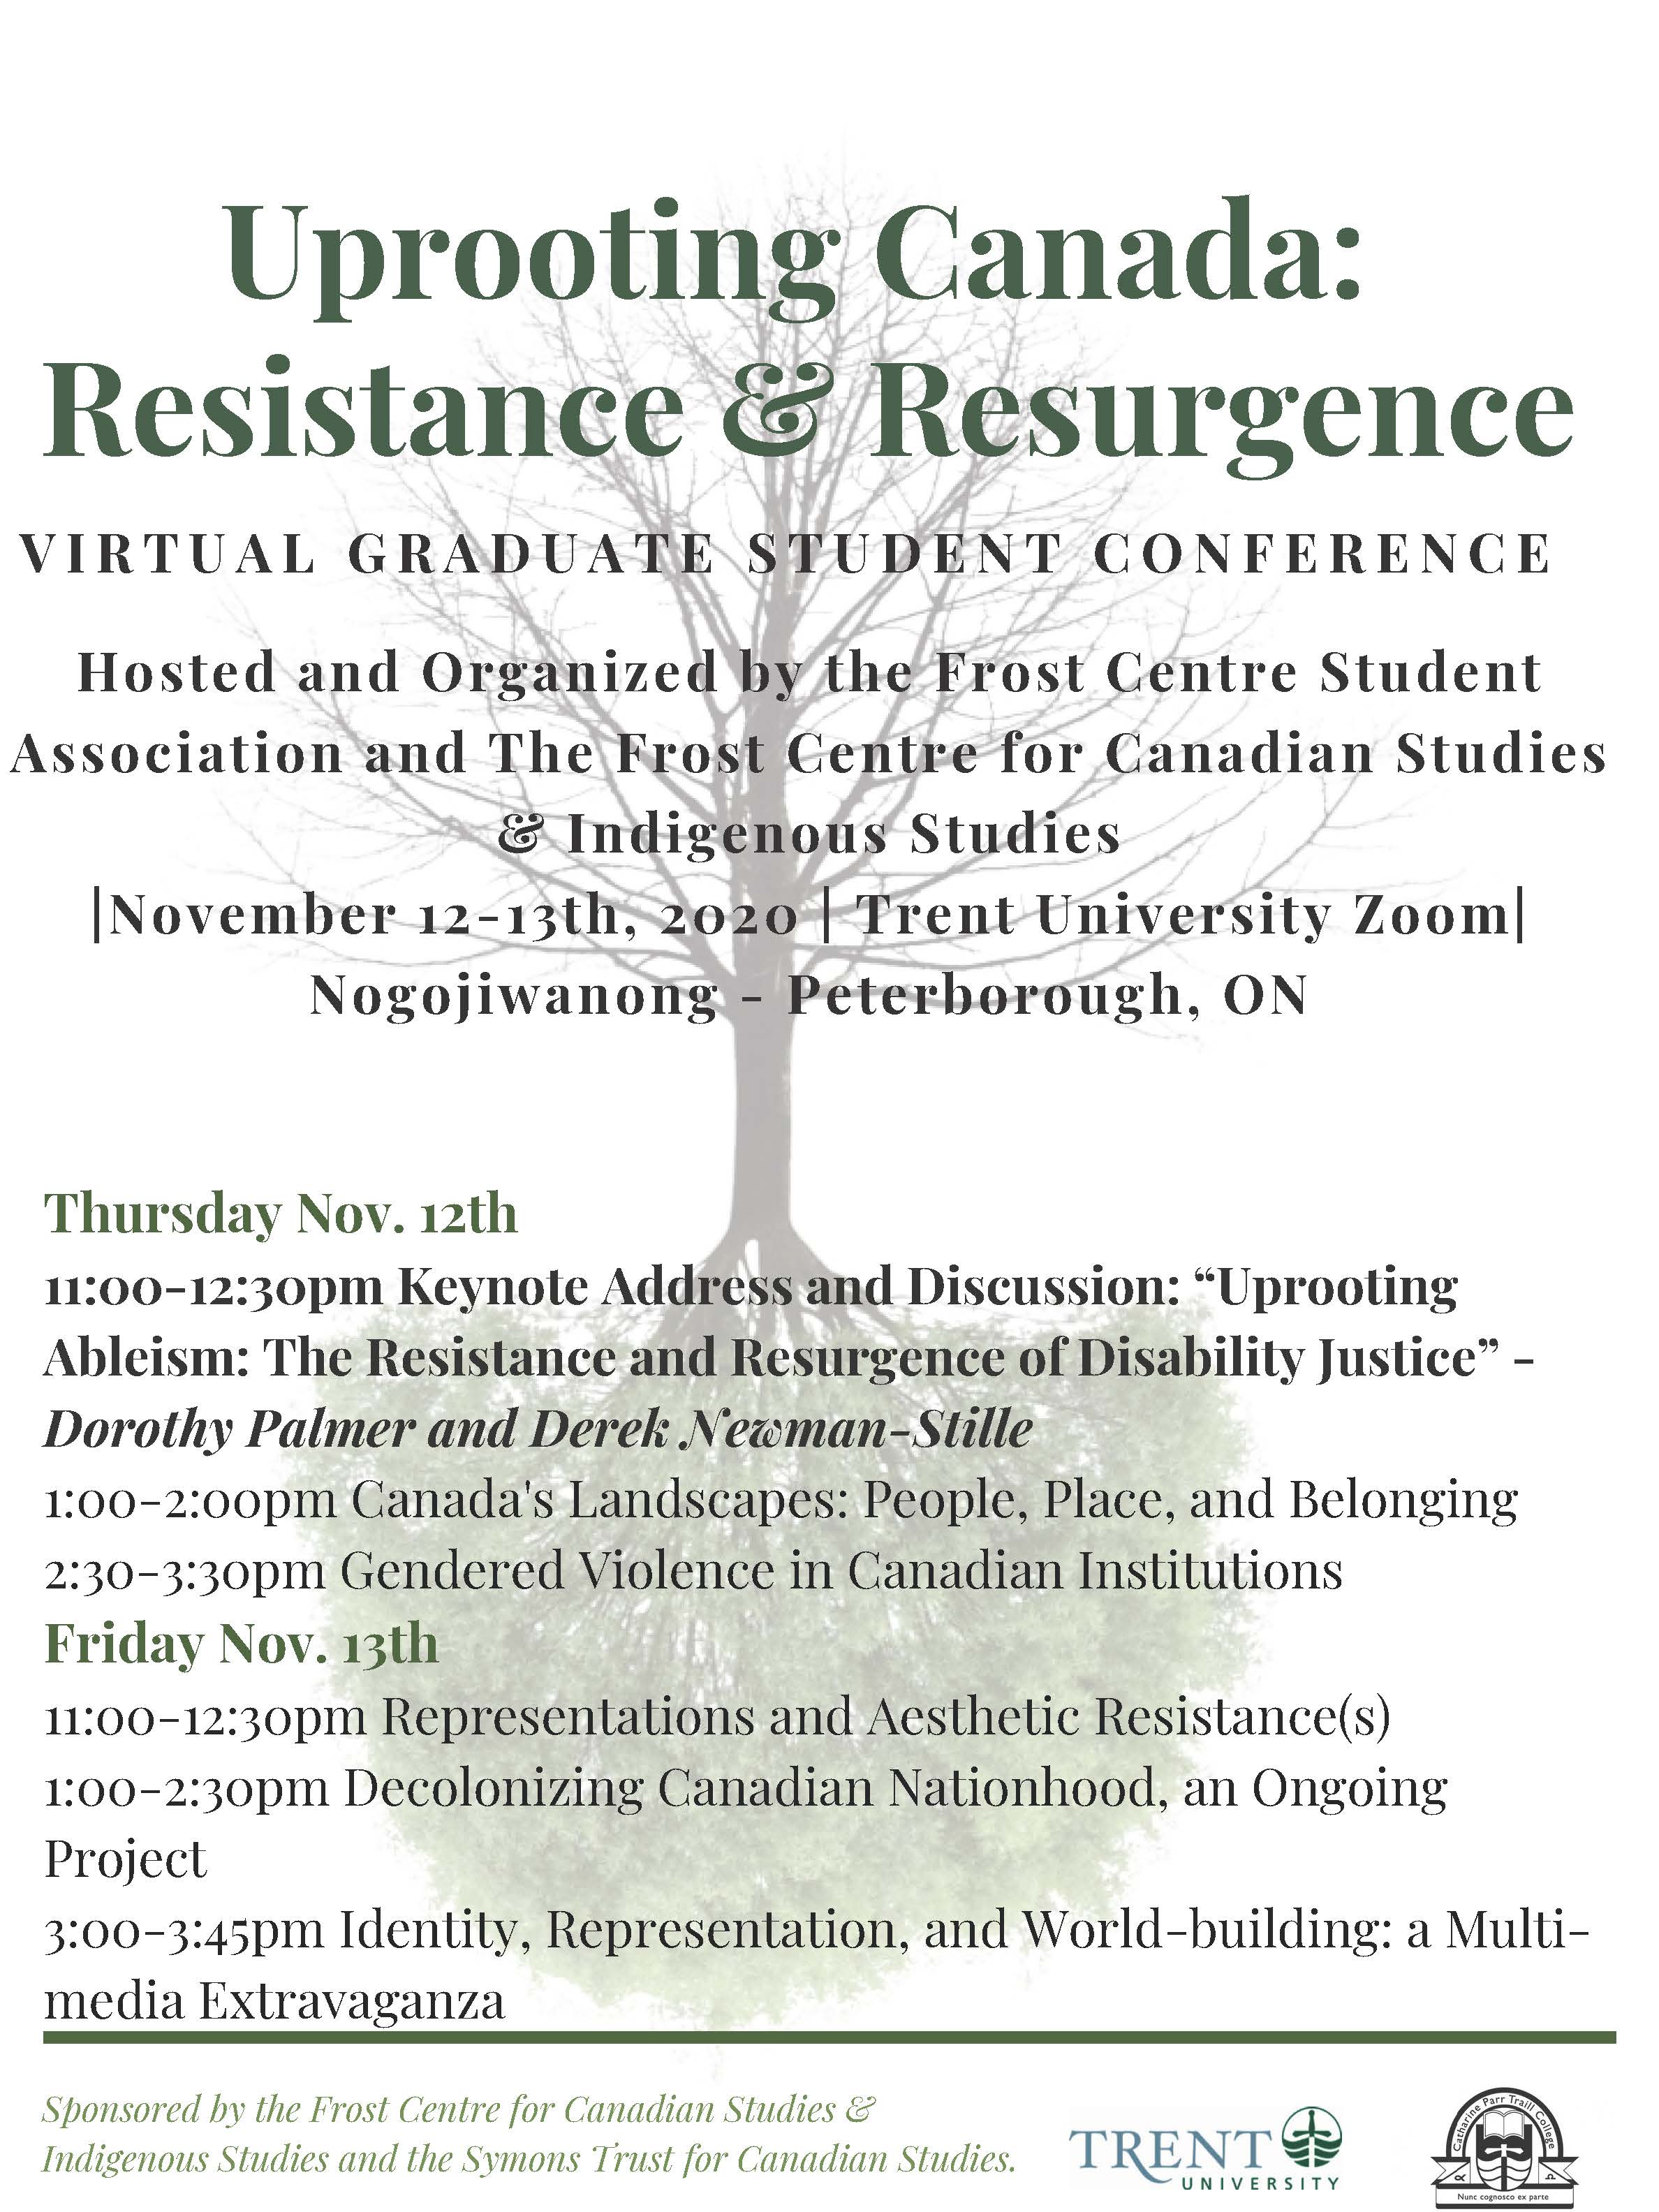 Uprooting Canada: Resistance & Resurgence November 2020 Graduate Student Conference